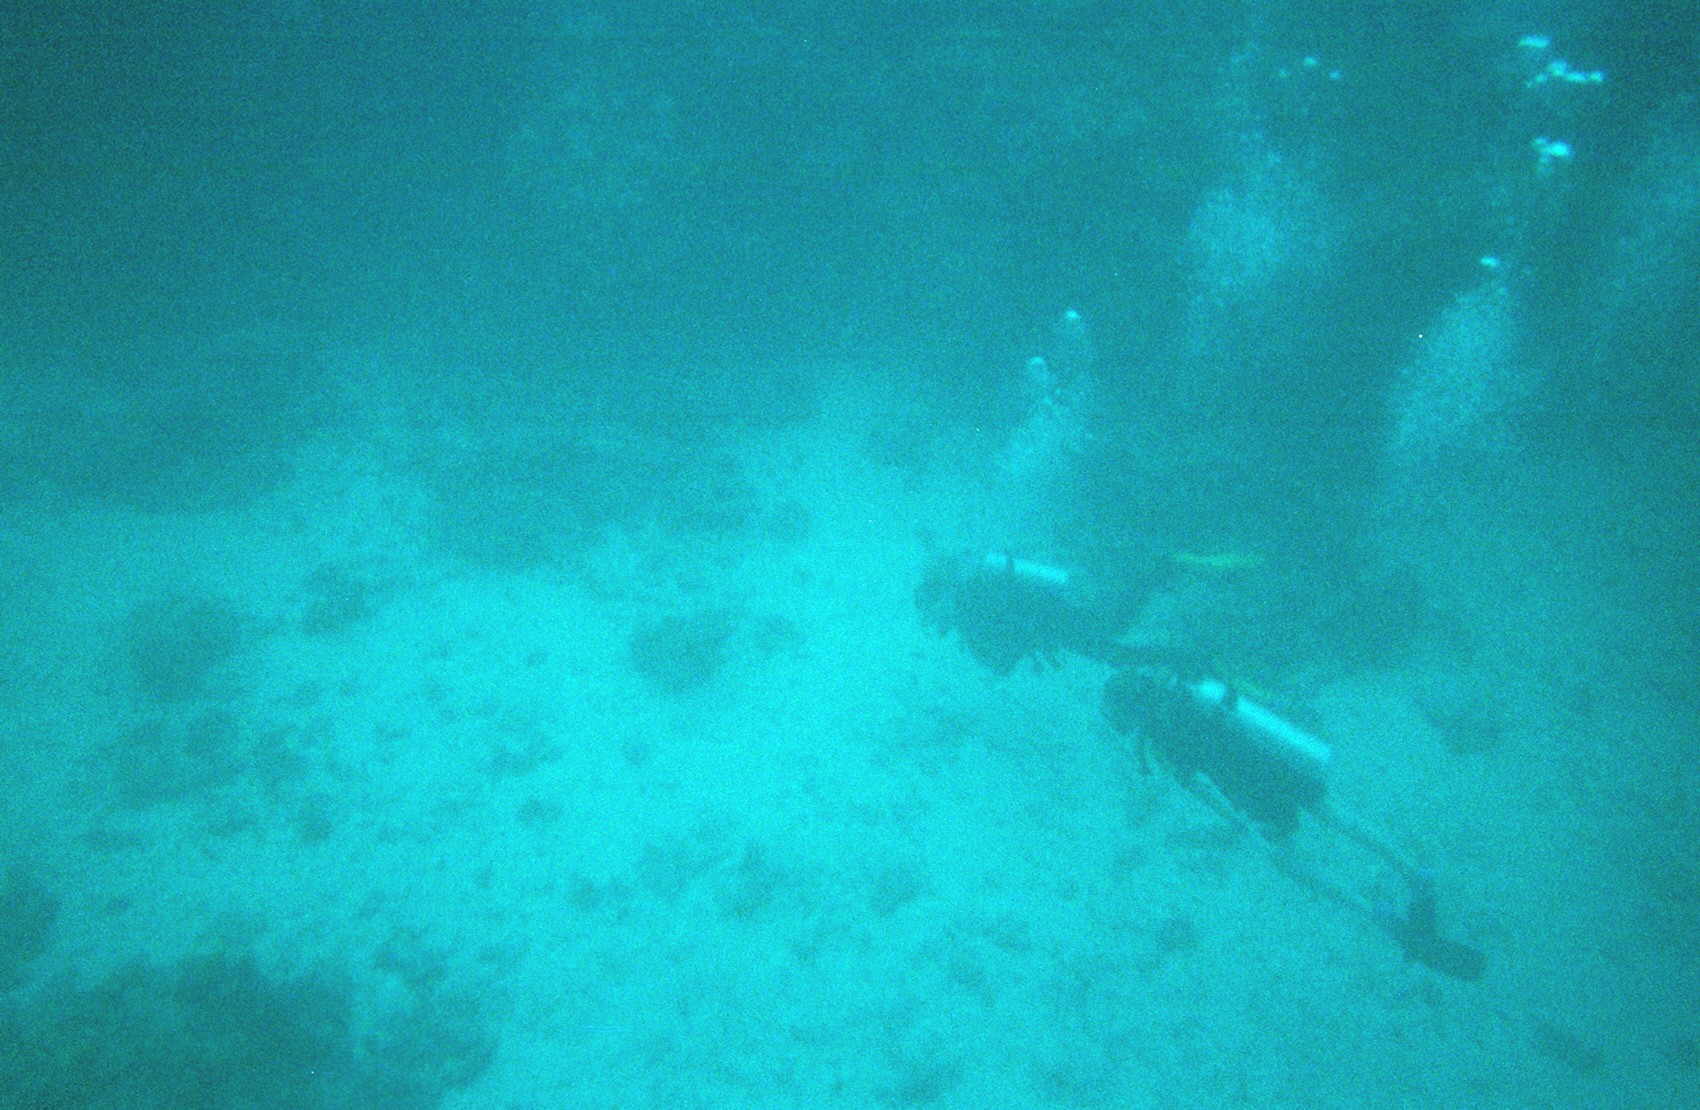 These divers swam pretty close to that shark